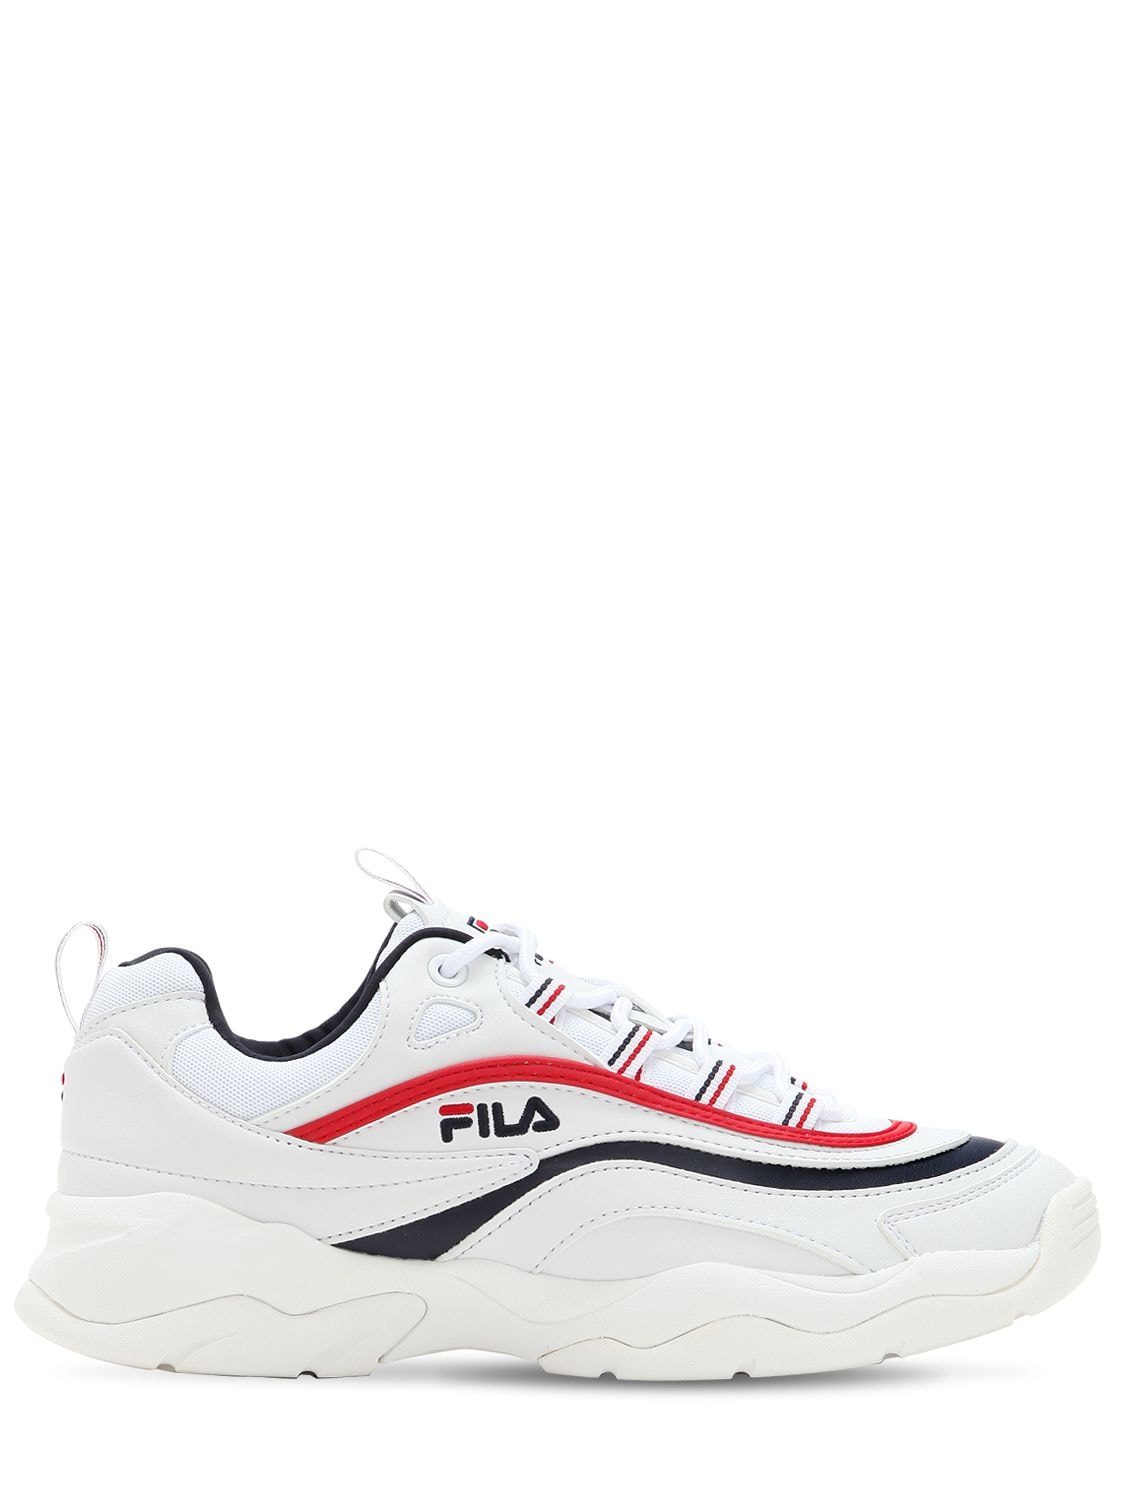 FILA RAY DISRUPTOR LEATHER PLATFORM trainers,68IWLE009-MTUW0